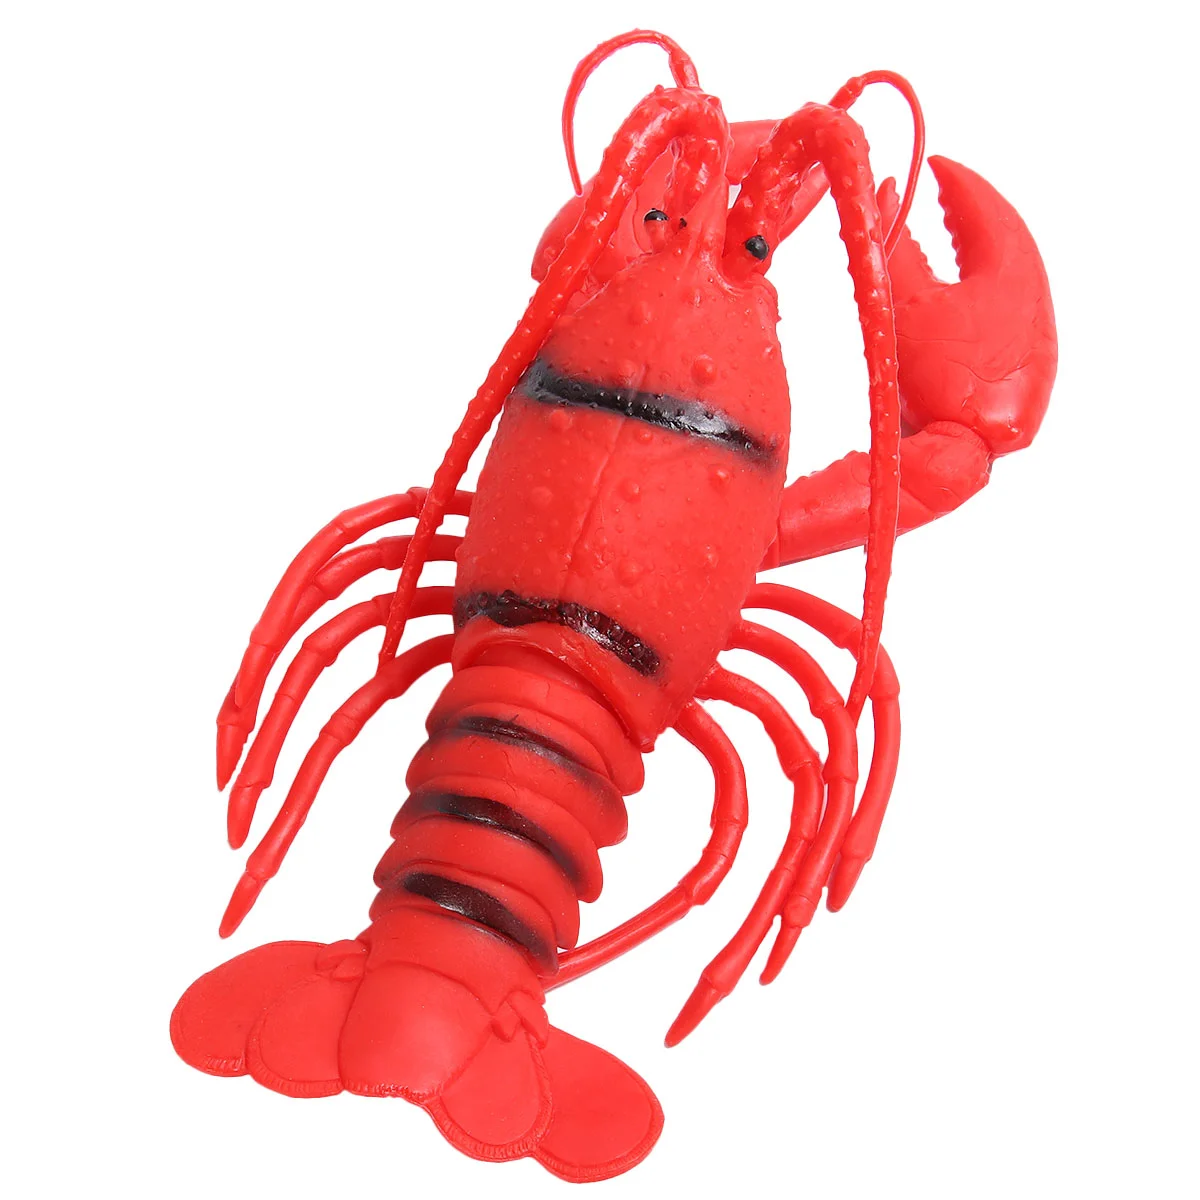 

Creature Figurine Simulation Lifelike Sound Lobster Photo Prop Early Educational Plaything for Children Kids